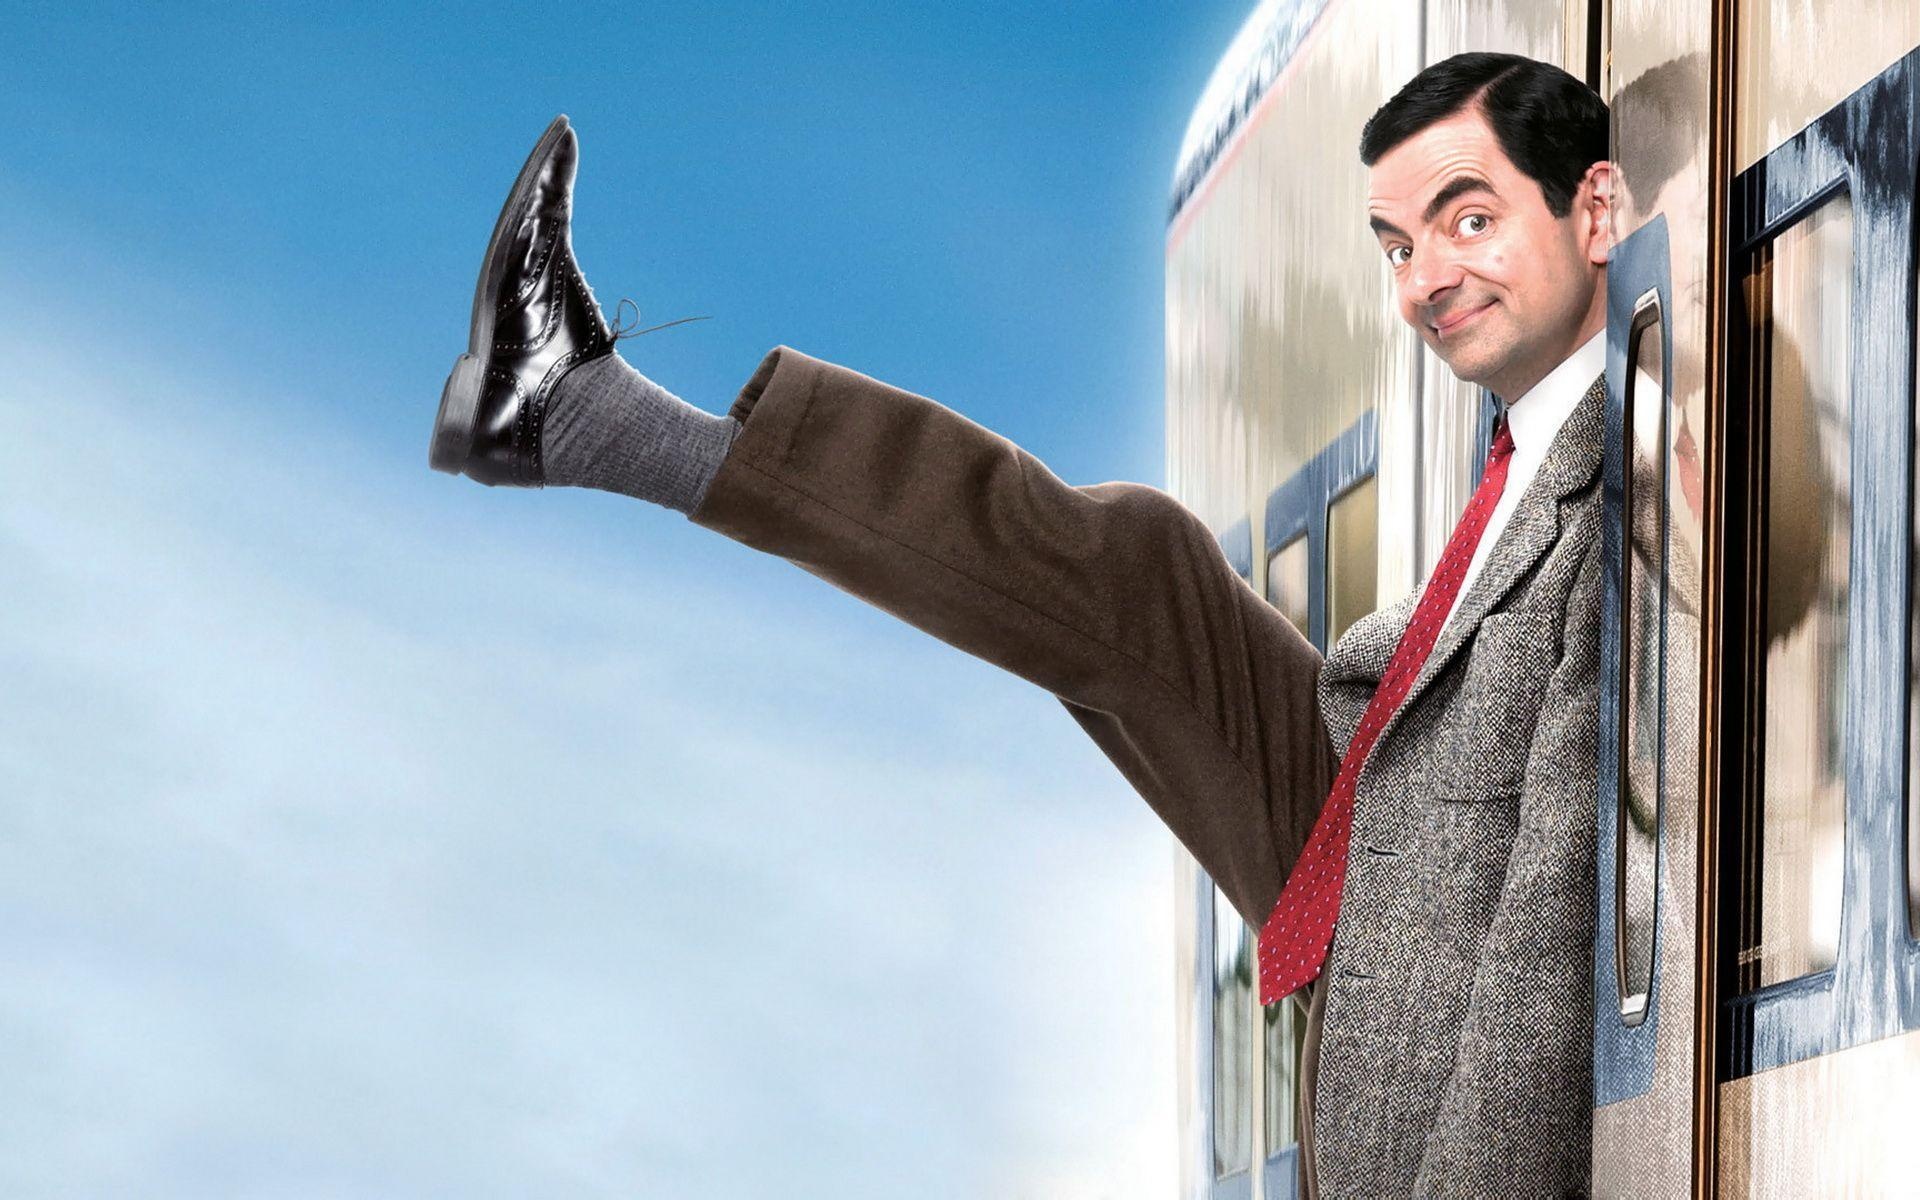 Rowan Atkinson: Appeared as Mr. Bean in a TV advert for Snickers in October 2014. 1920x1200 HD Wallpaper.